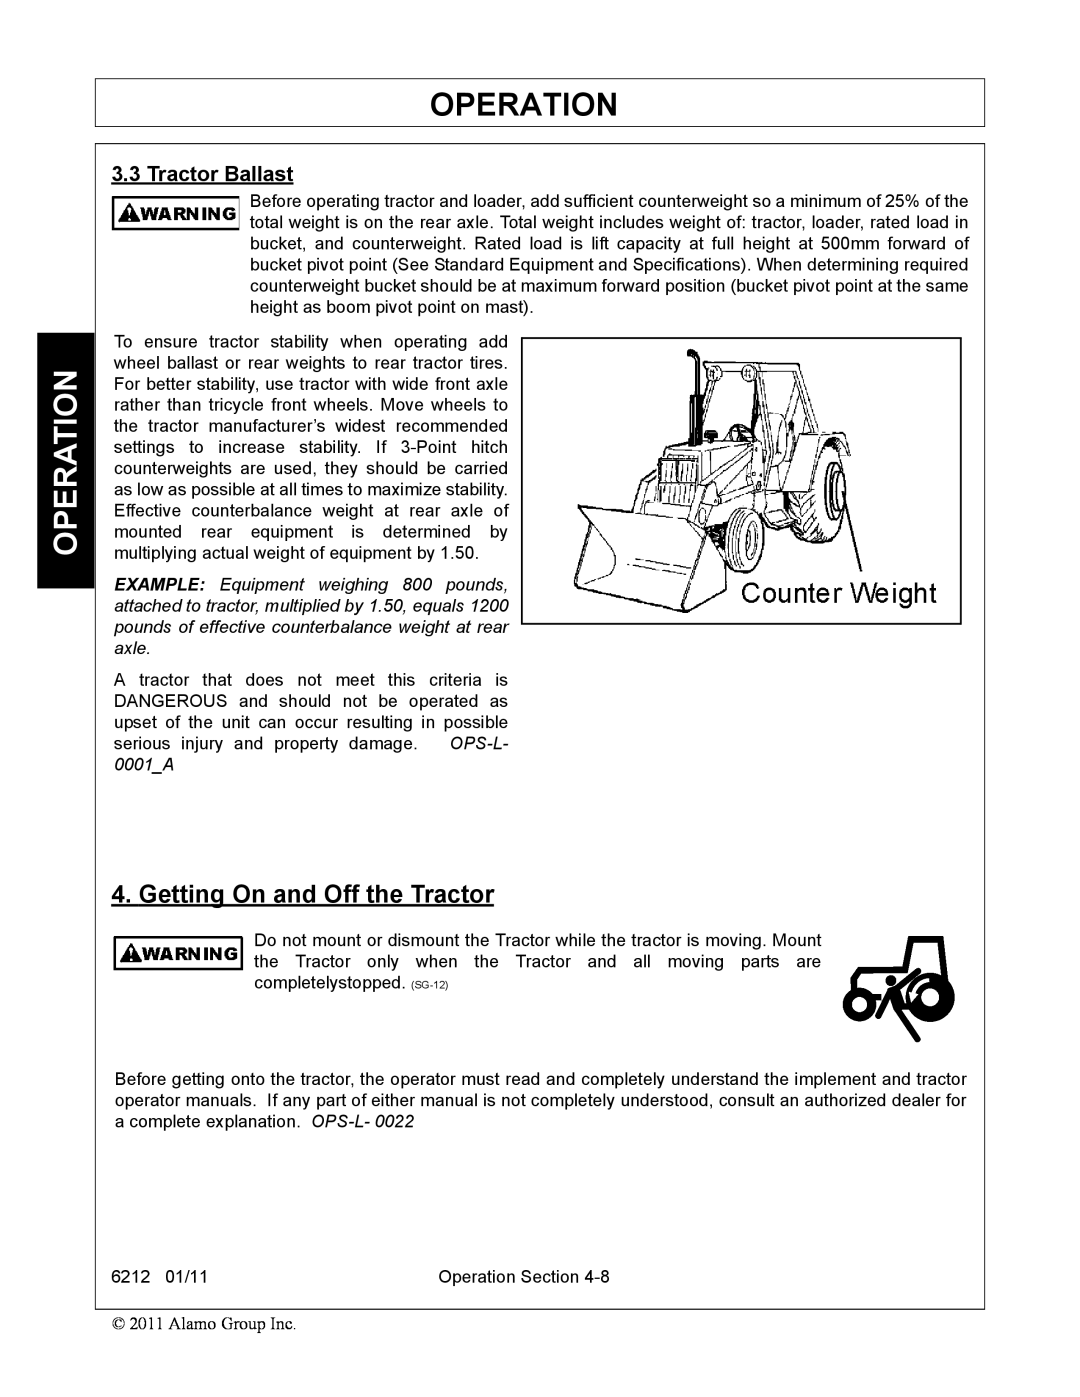 Alamo 6212 manual Operation, Getting On and Off the Tractor, Tractor Ballast 